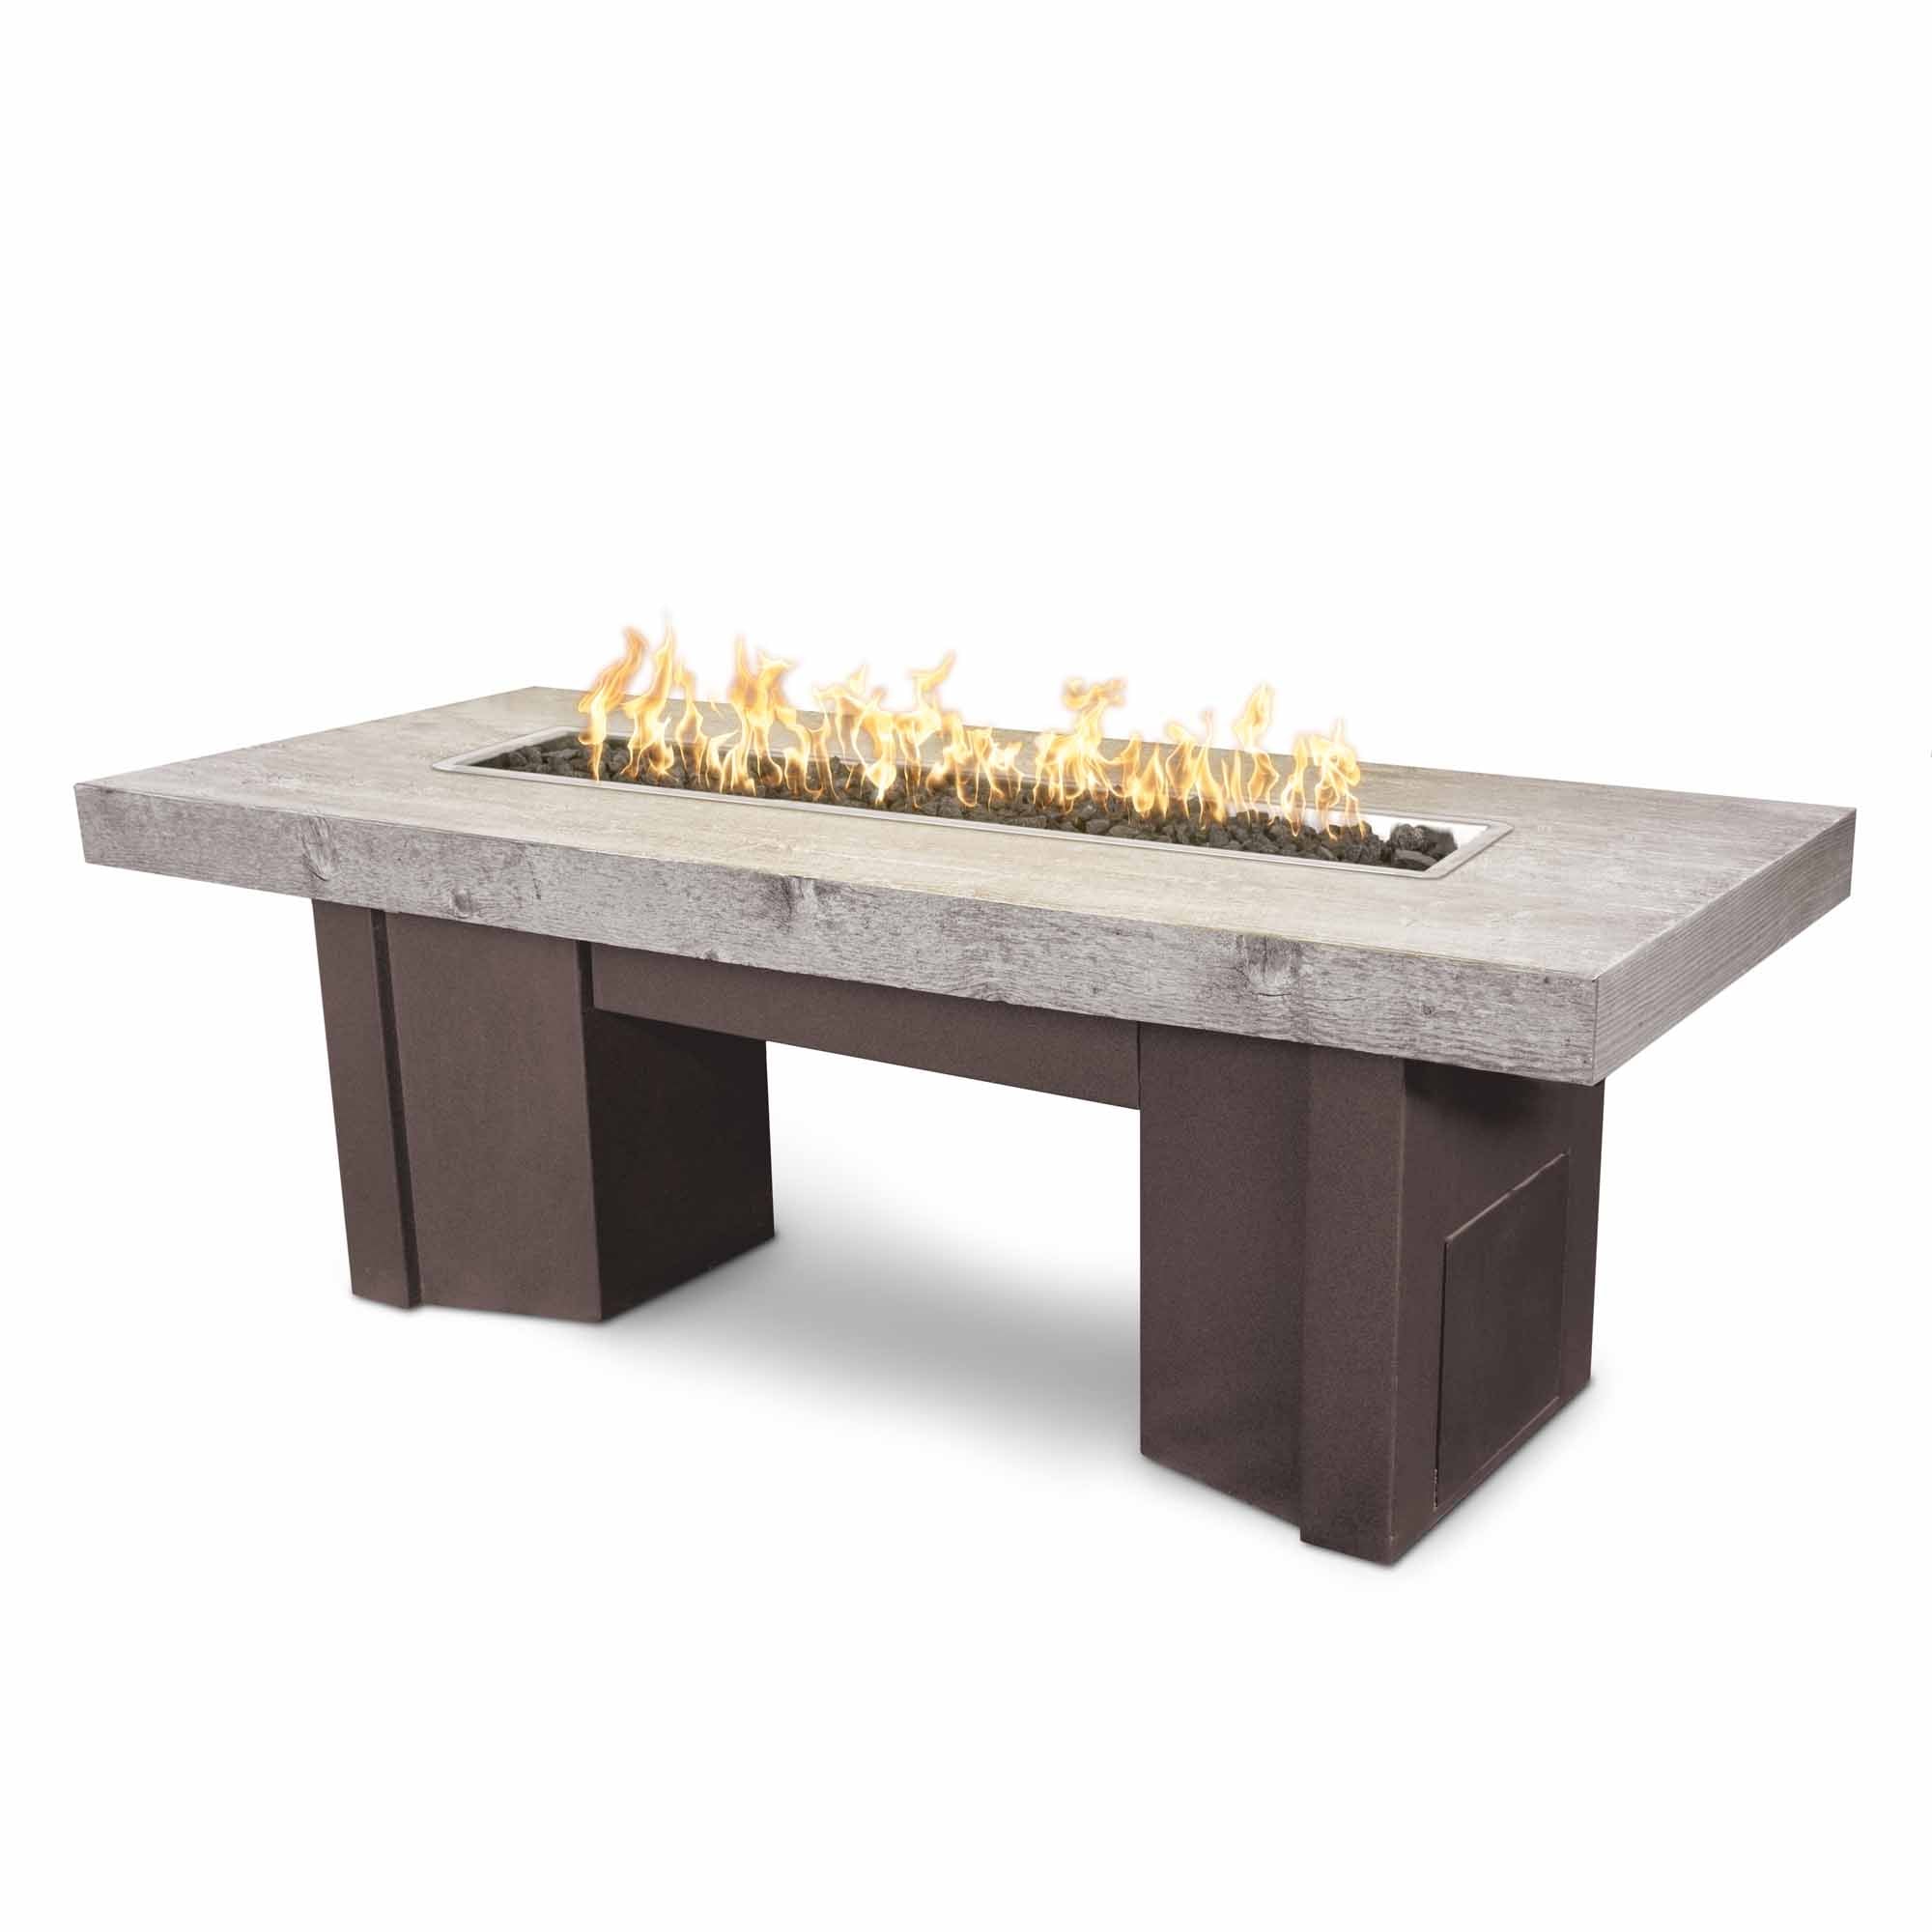 Alameda Fire Table with Wood Grain Top and Powder Coated Metal Base by The Outdoor Plus + Free Cover - Majestic Fountains and More